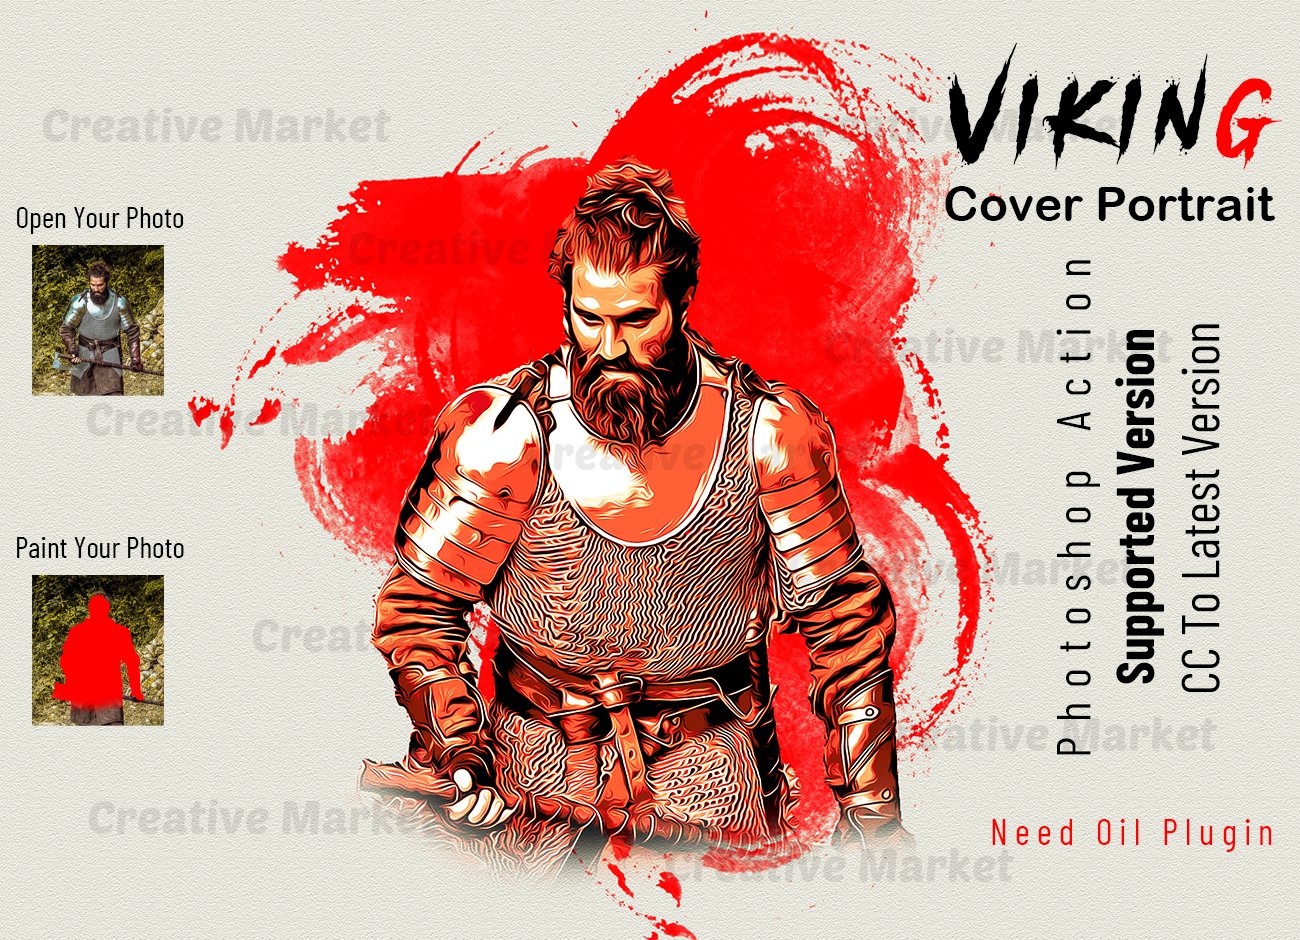 Viking Cover Portrait PS Actioncover image.